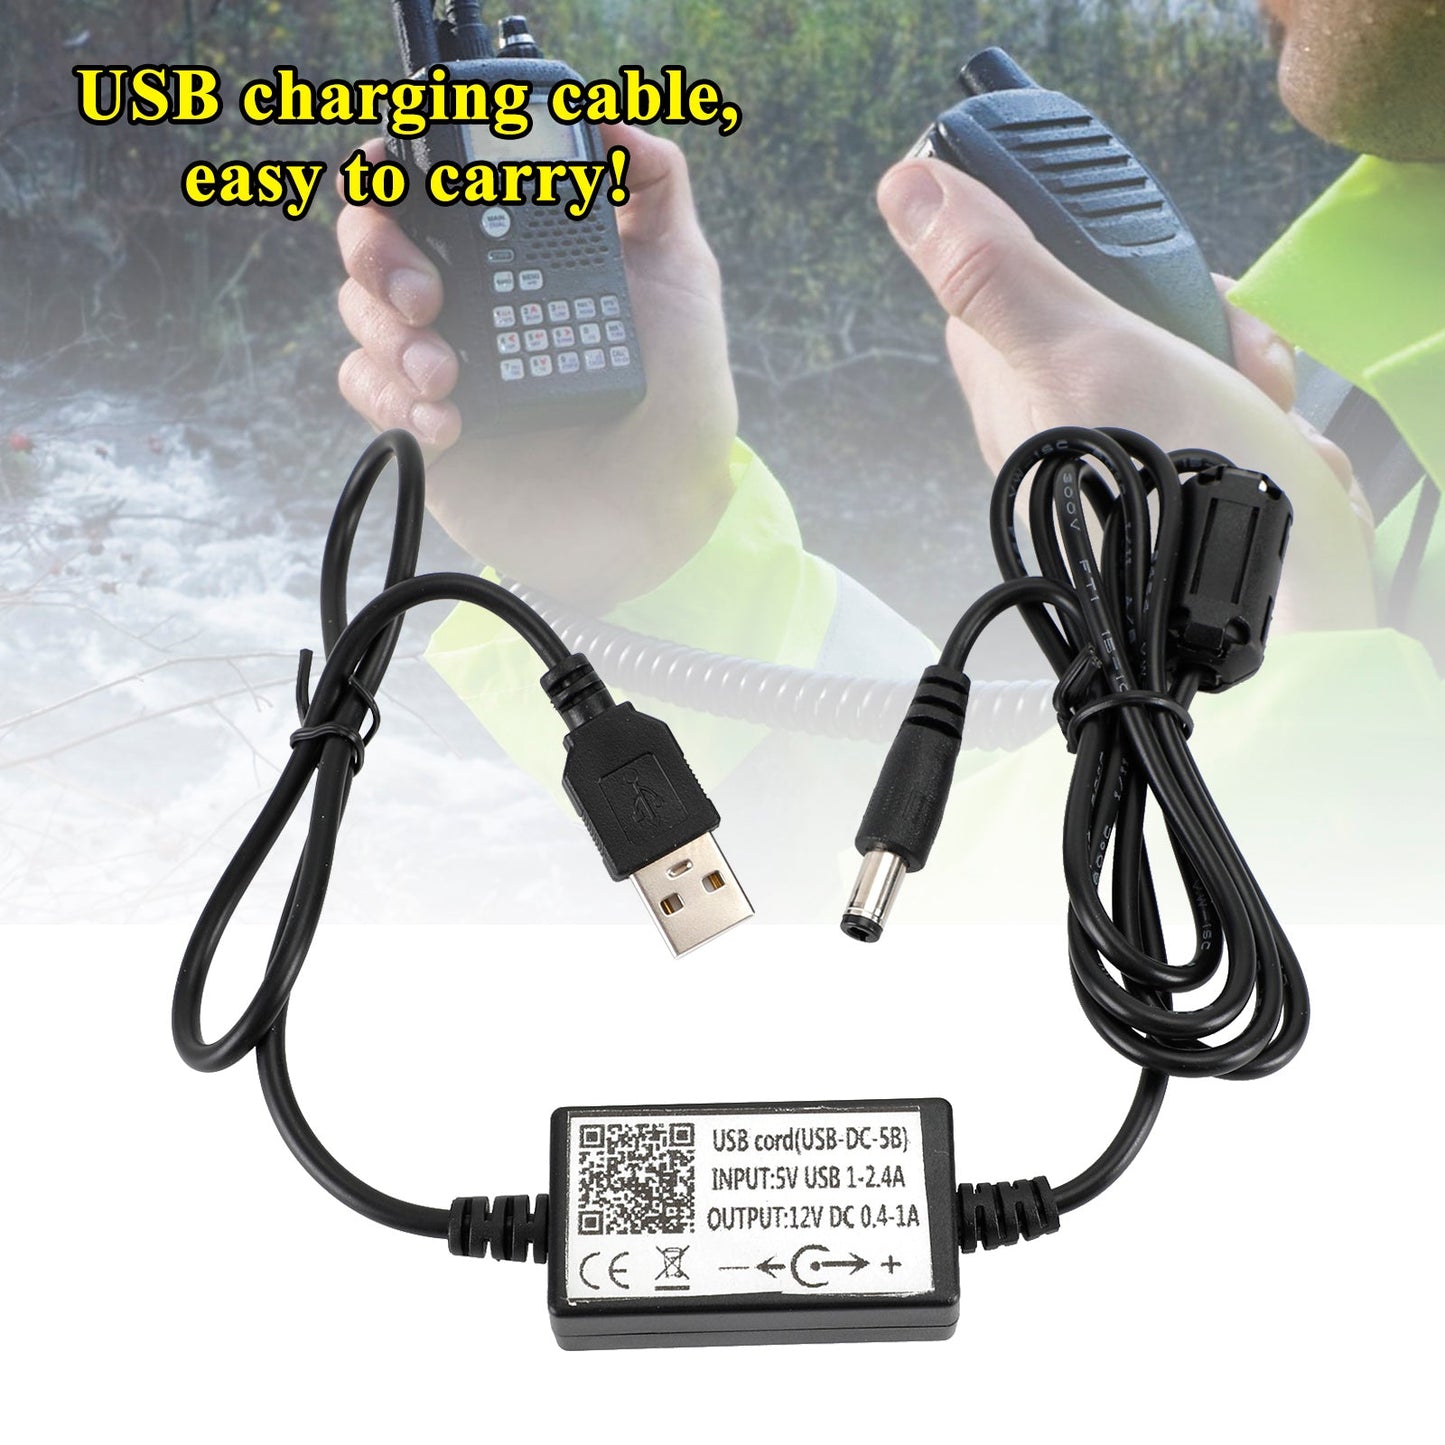 USB-DC-5B Cable Charger For ICOM F21/V8 Battery Charger For Walkie Talkie